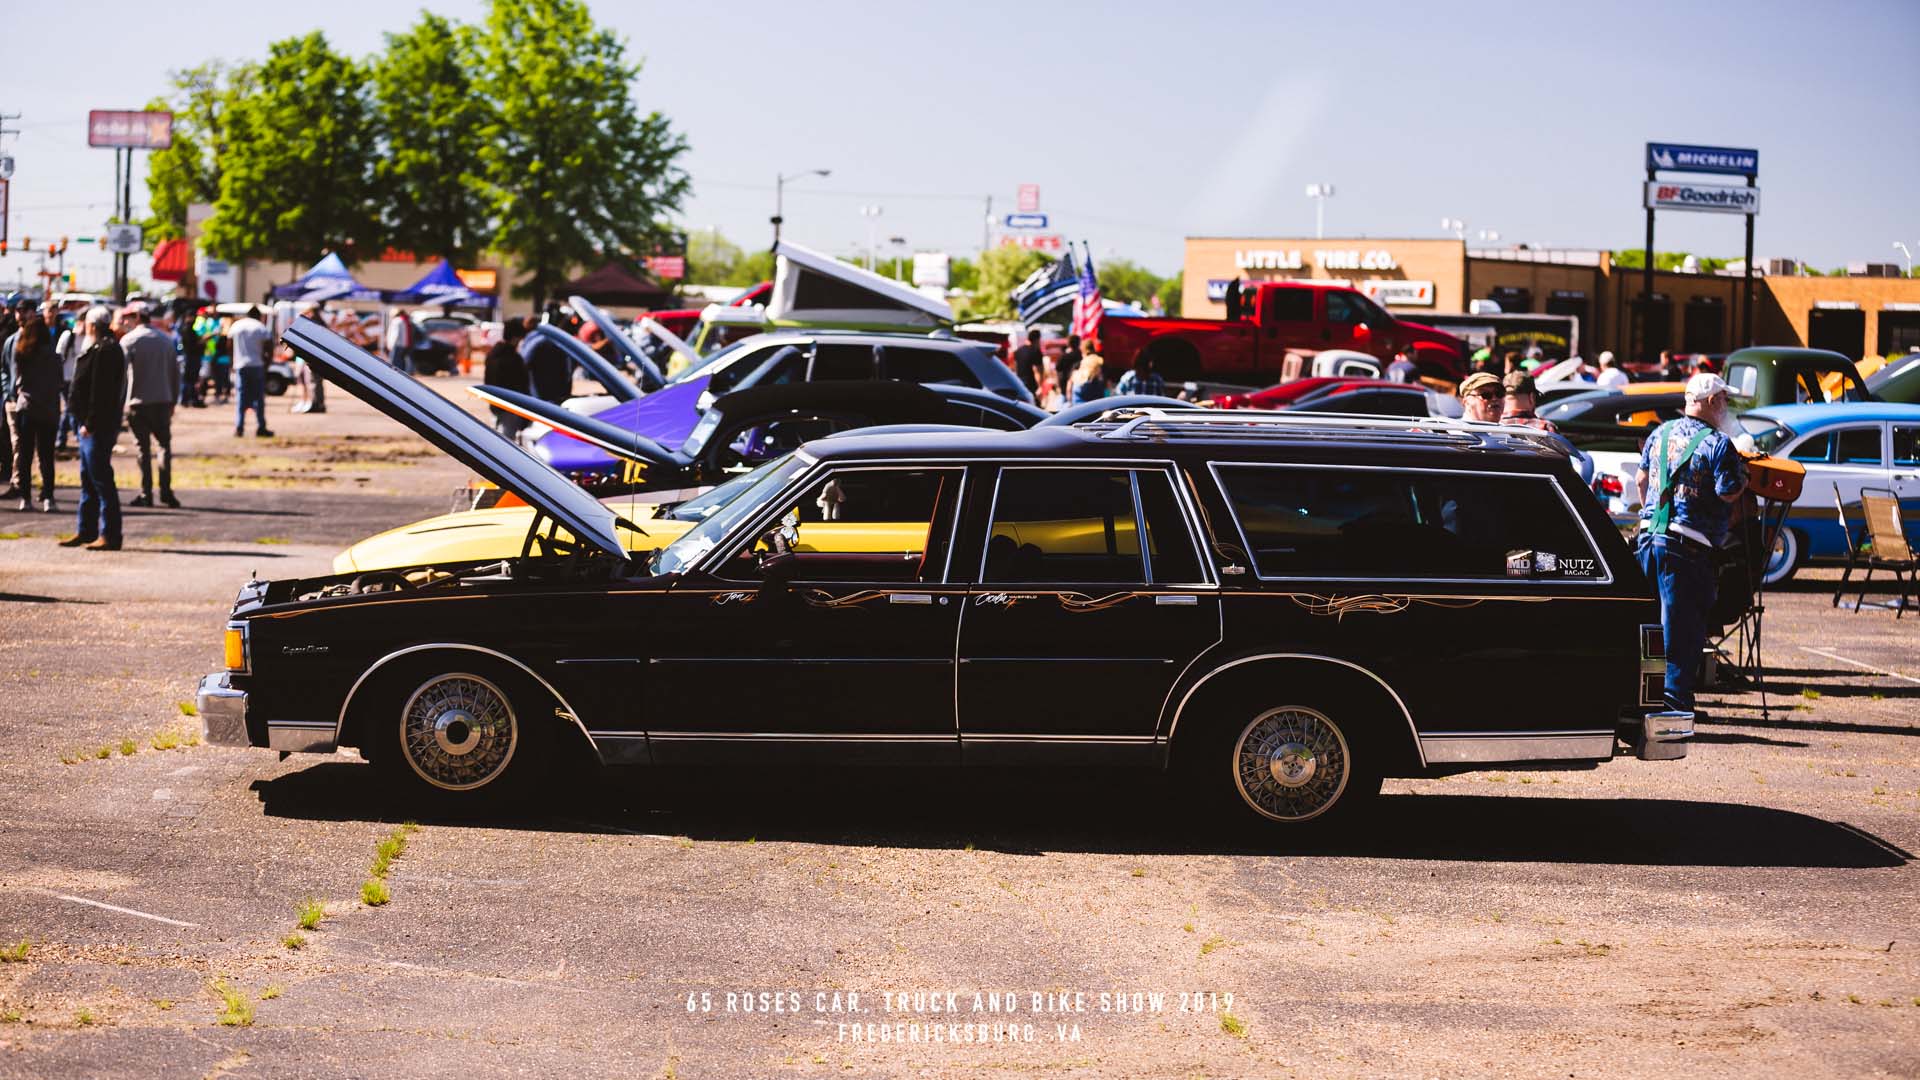 4th Annual 65 Roses Car Show benefiting Cystic Fibrosis